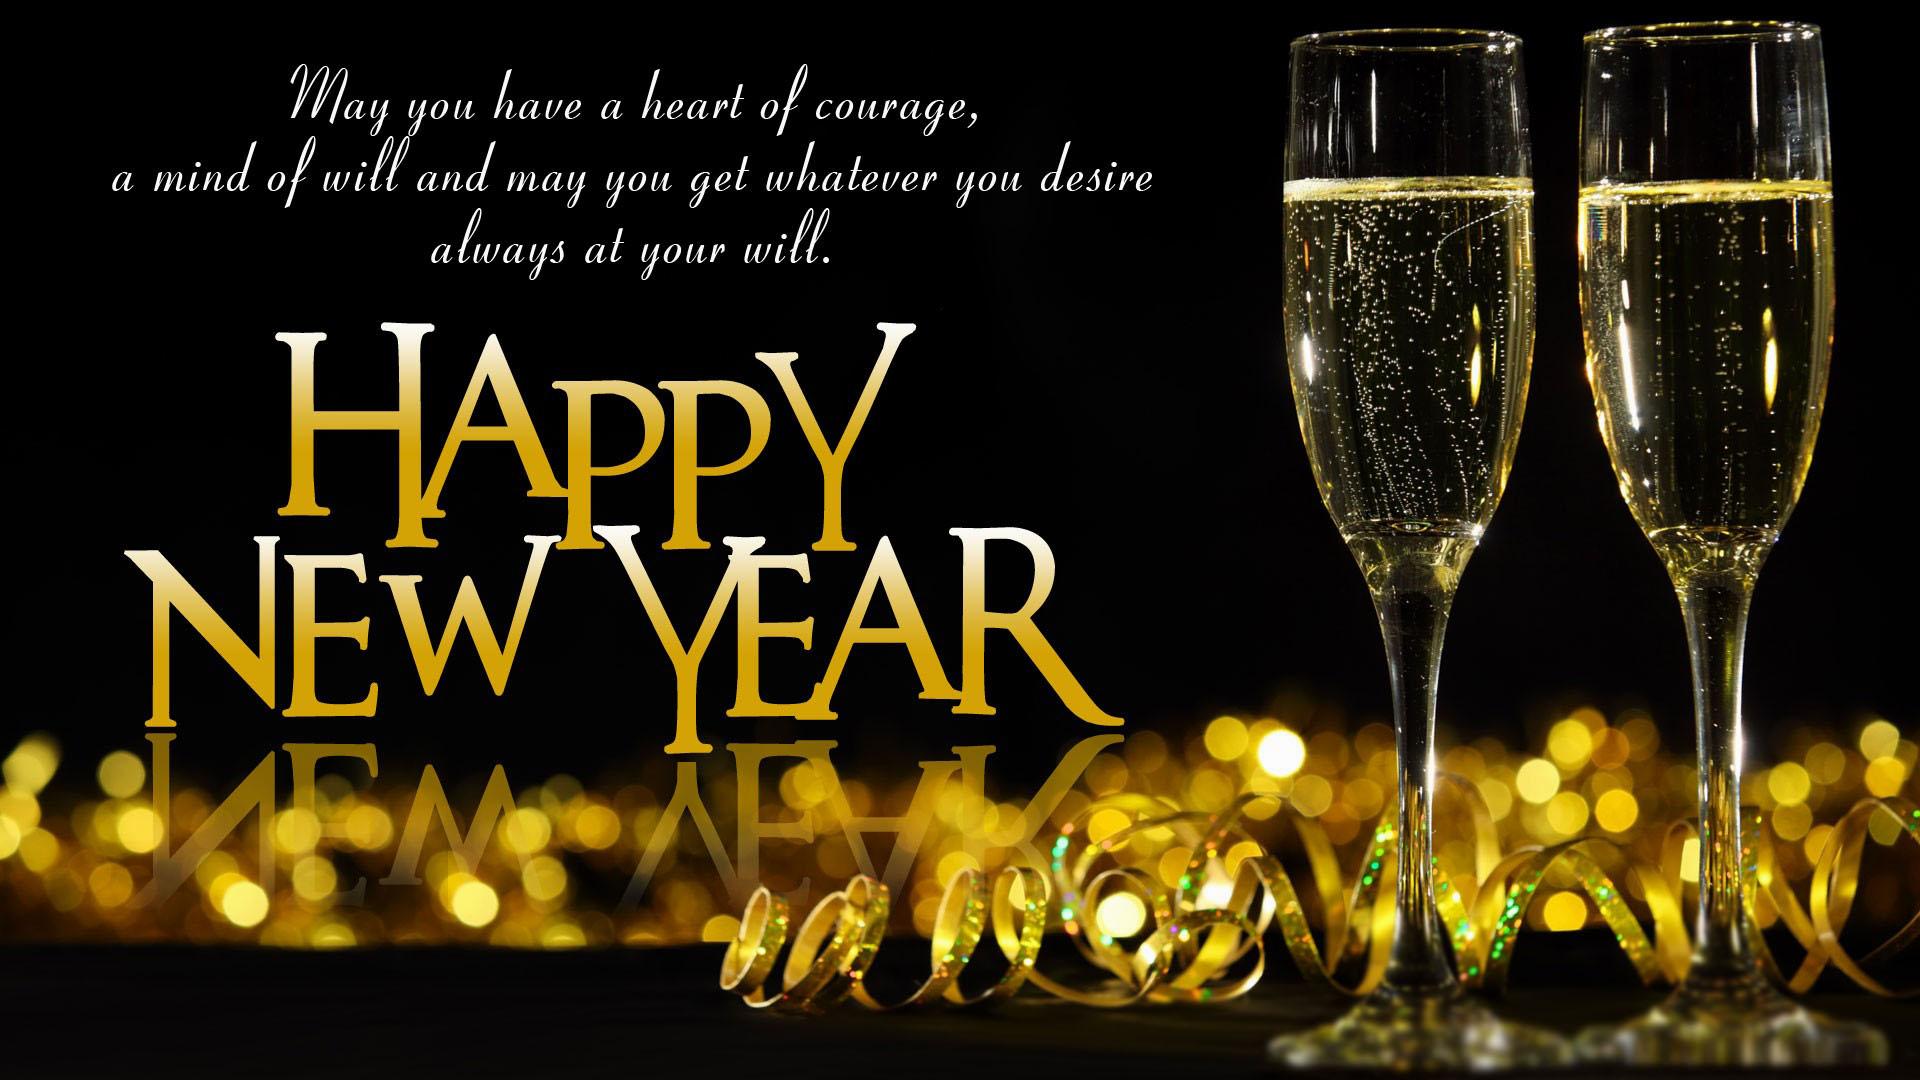 31 Dec 2020 Happy New Year Eve Wishes, SMS Messages Quotes Whatsapp